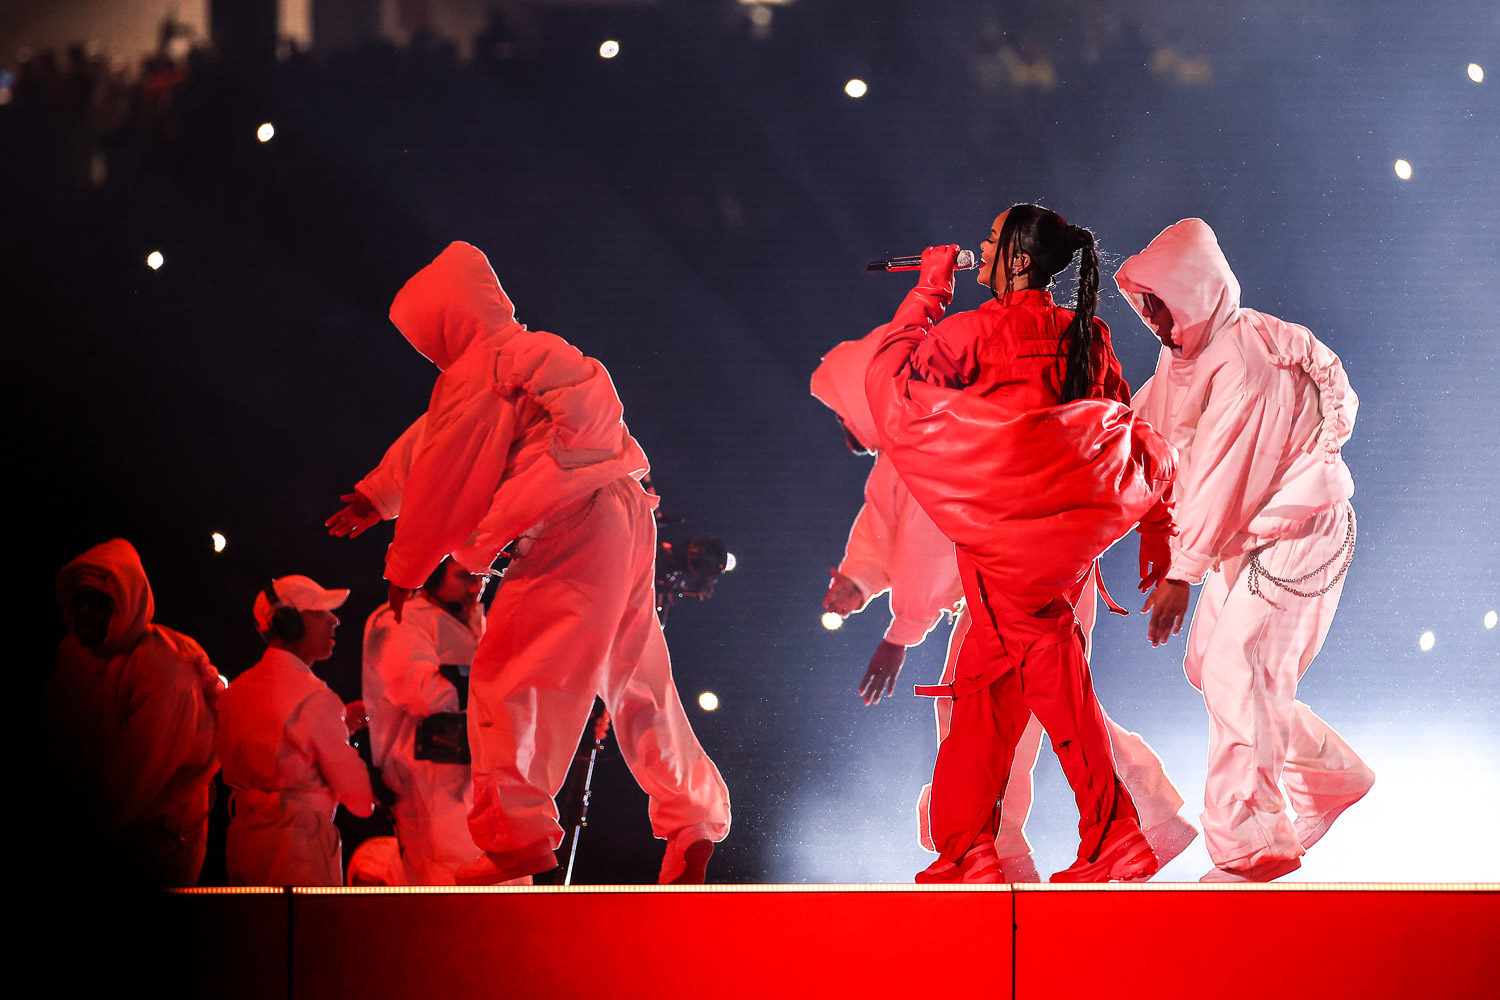 Rihanna performing during the Apple Music Super Bowl LVII Halftime Show at the NFL Super Bowl 57 football game between the Kansas City Chiefs and the Philadelphia Eagles, Sunday, Feb. 12, 2023, in Glendale, Arizona.